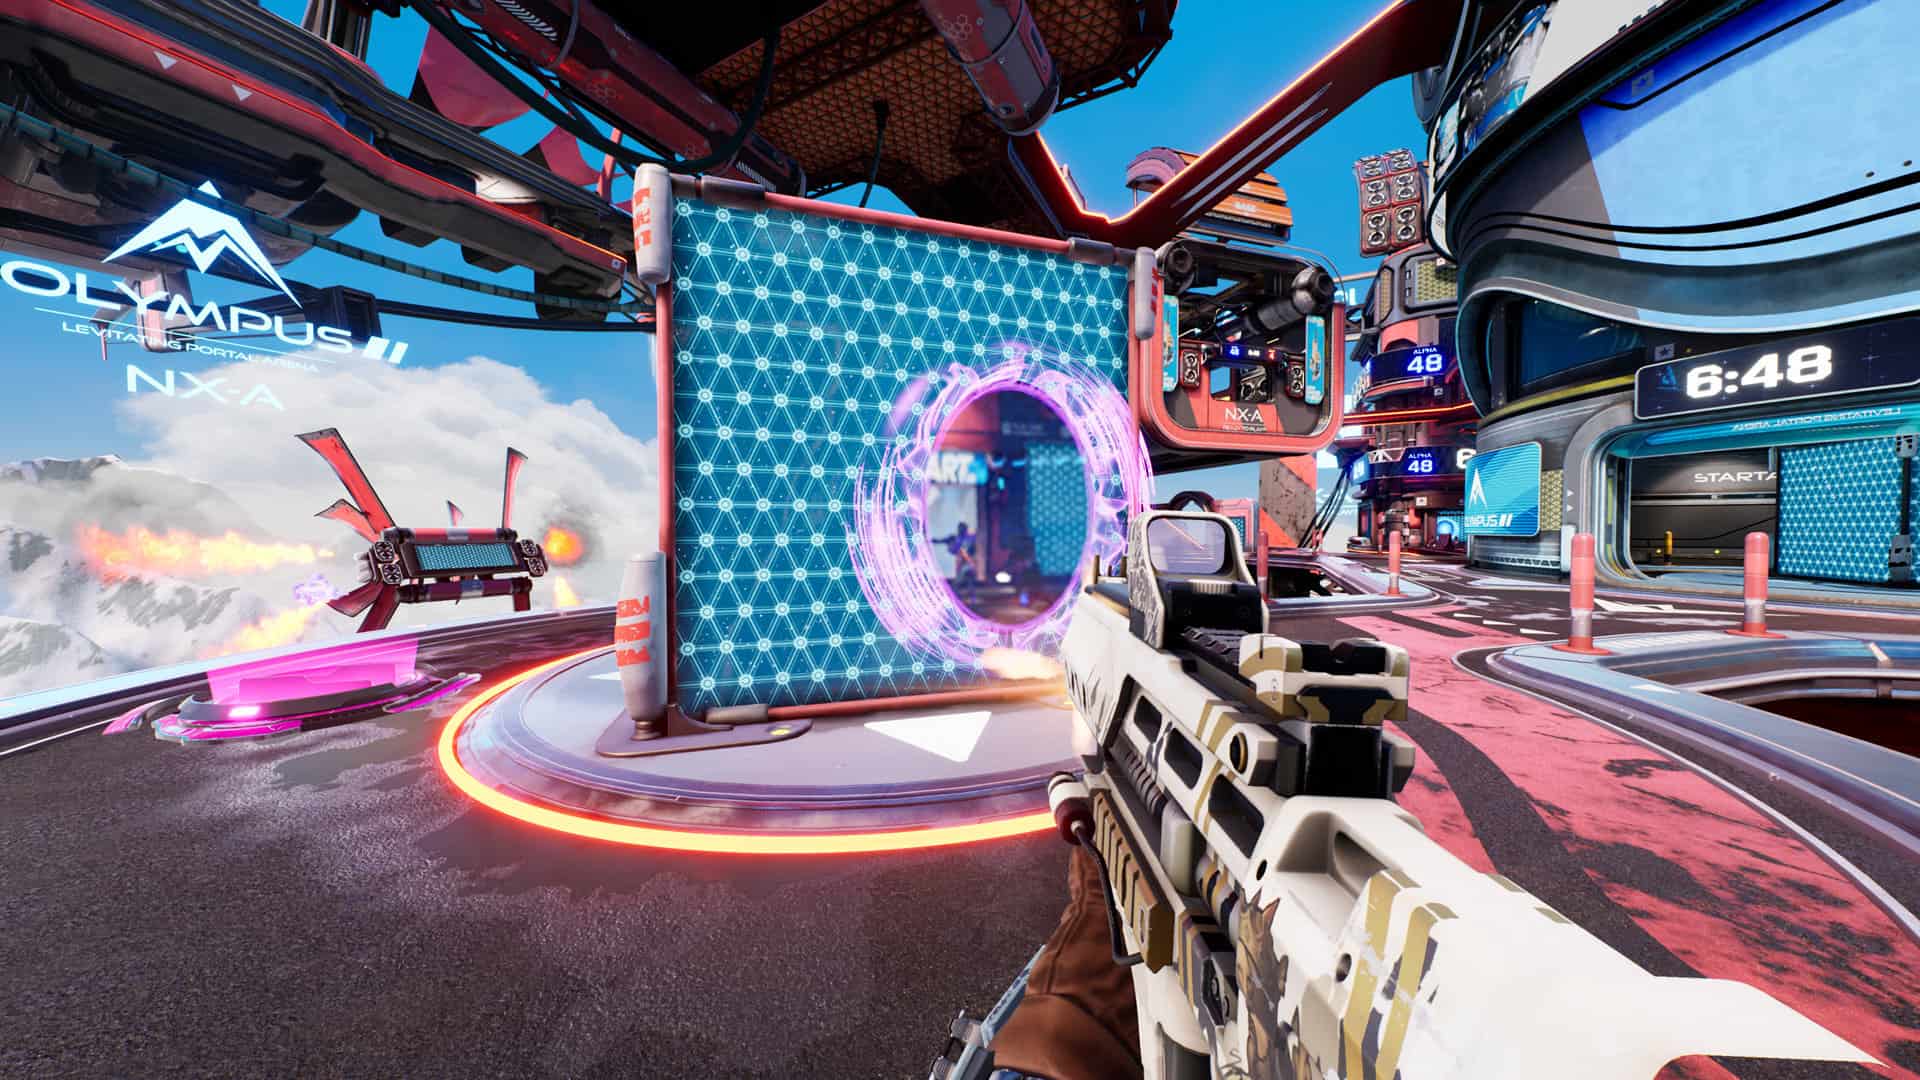 Portal-meets-Halo FPS Splitgate will now launch in August following enormous popularity of beta